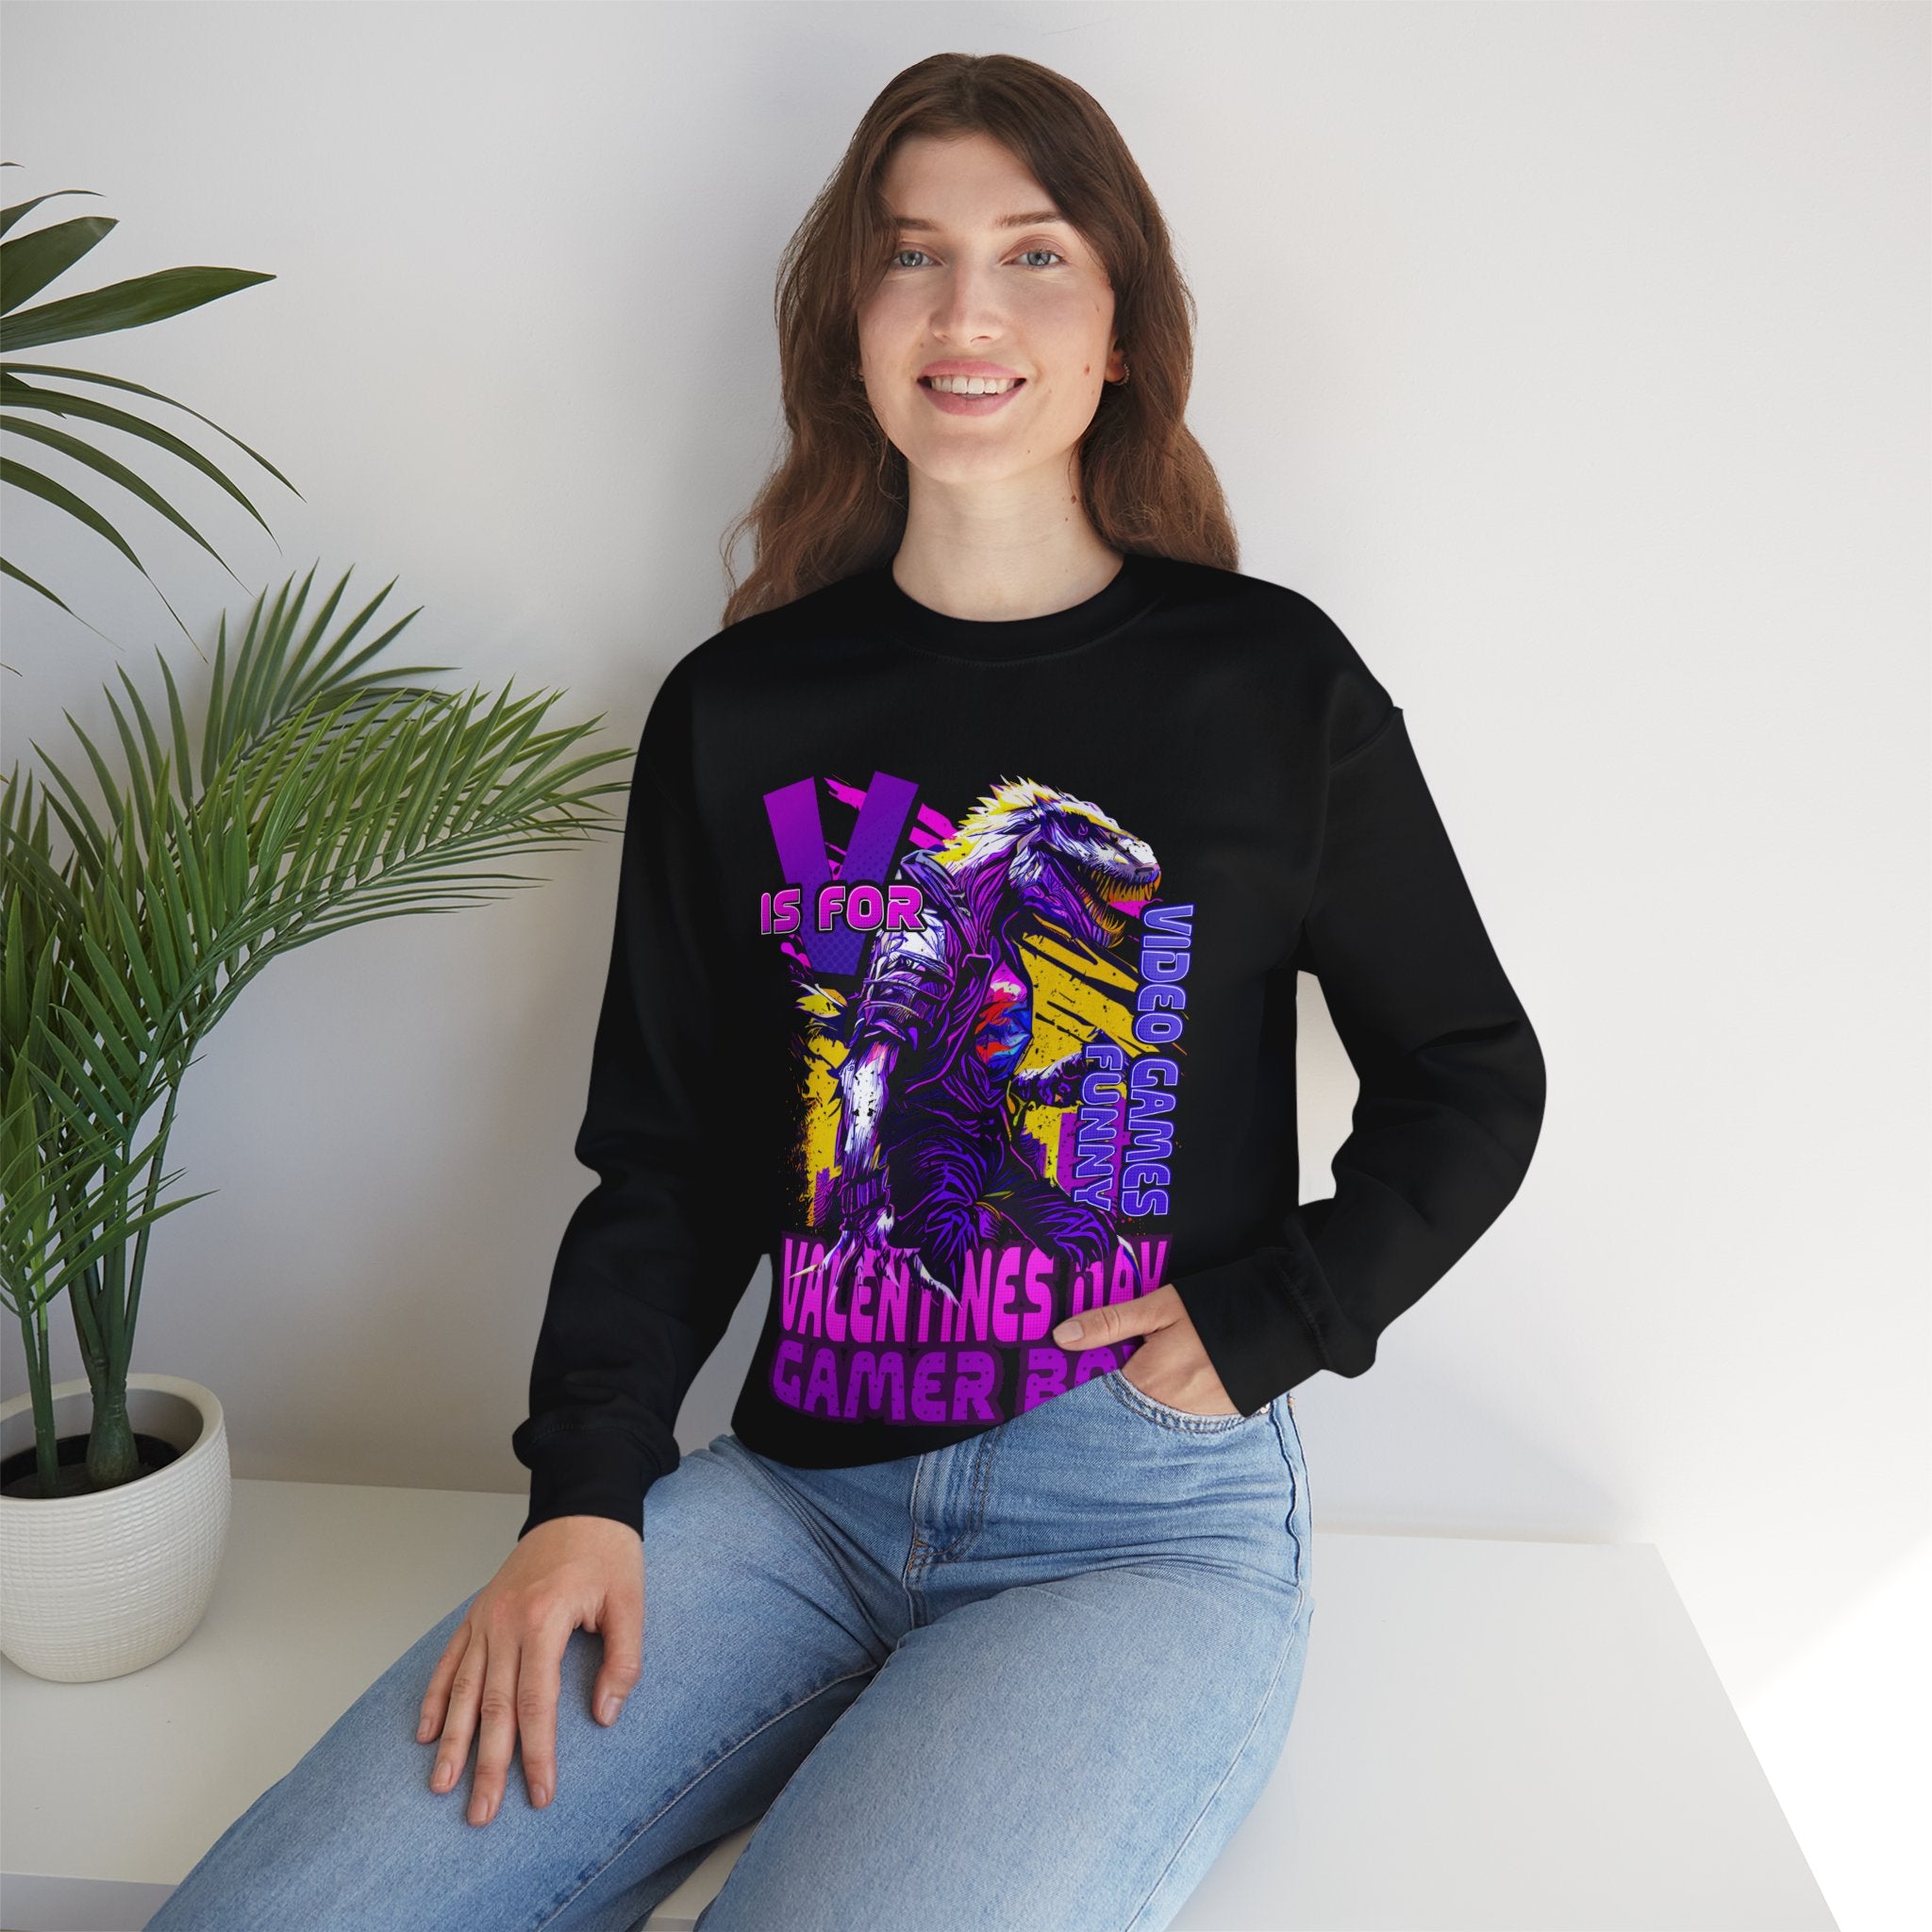 V Is For Valentines: The Fun And Funny Gamer Crewneck Sweatshirt